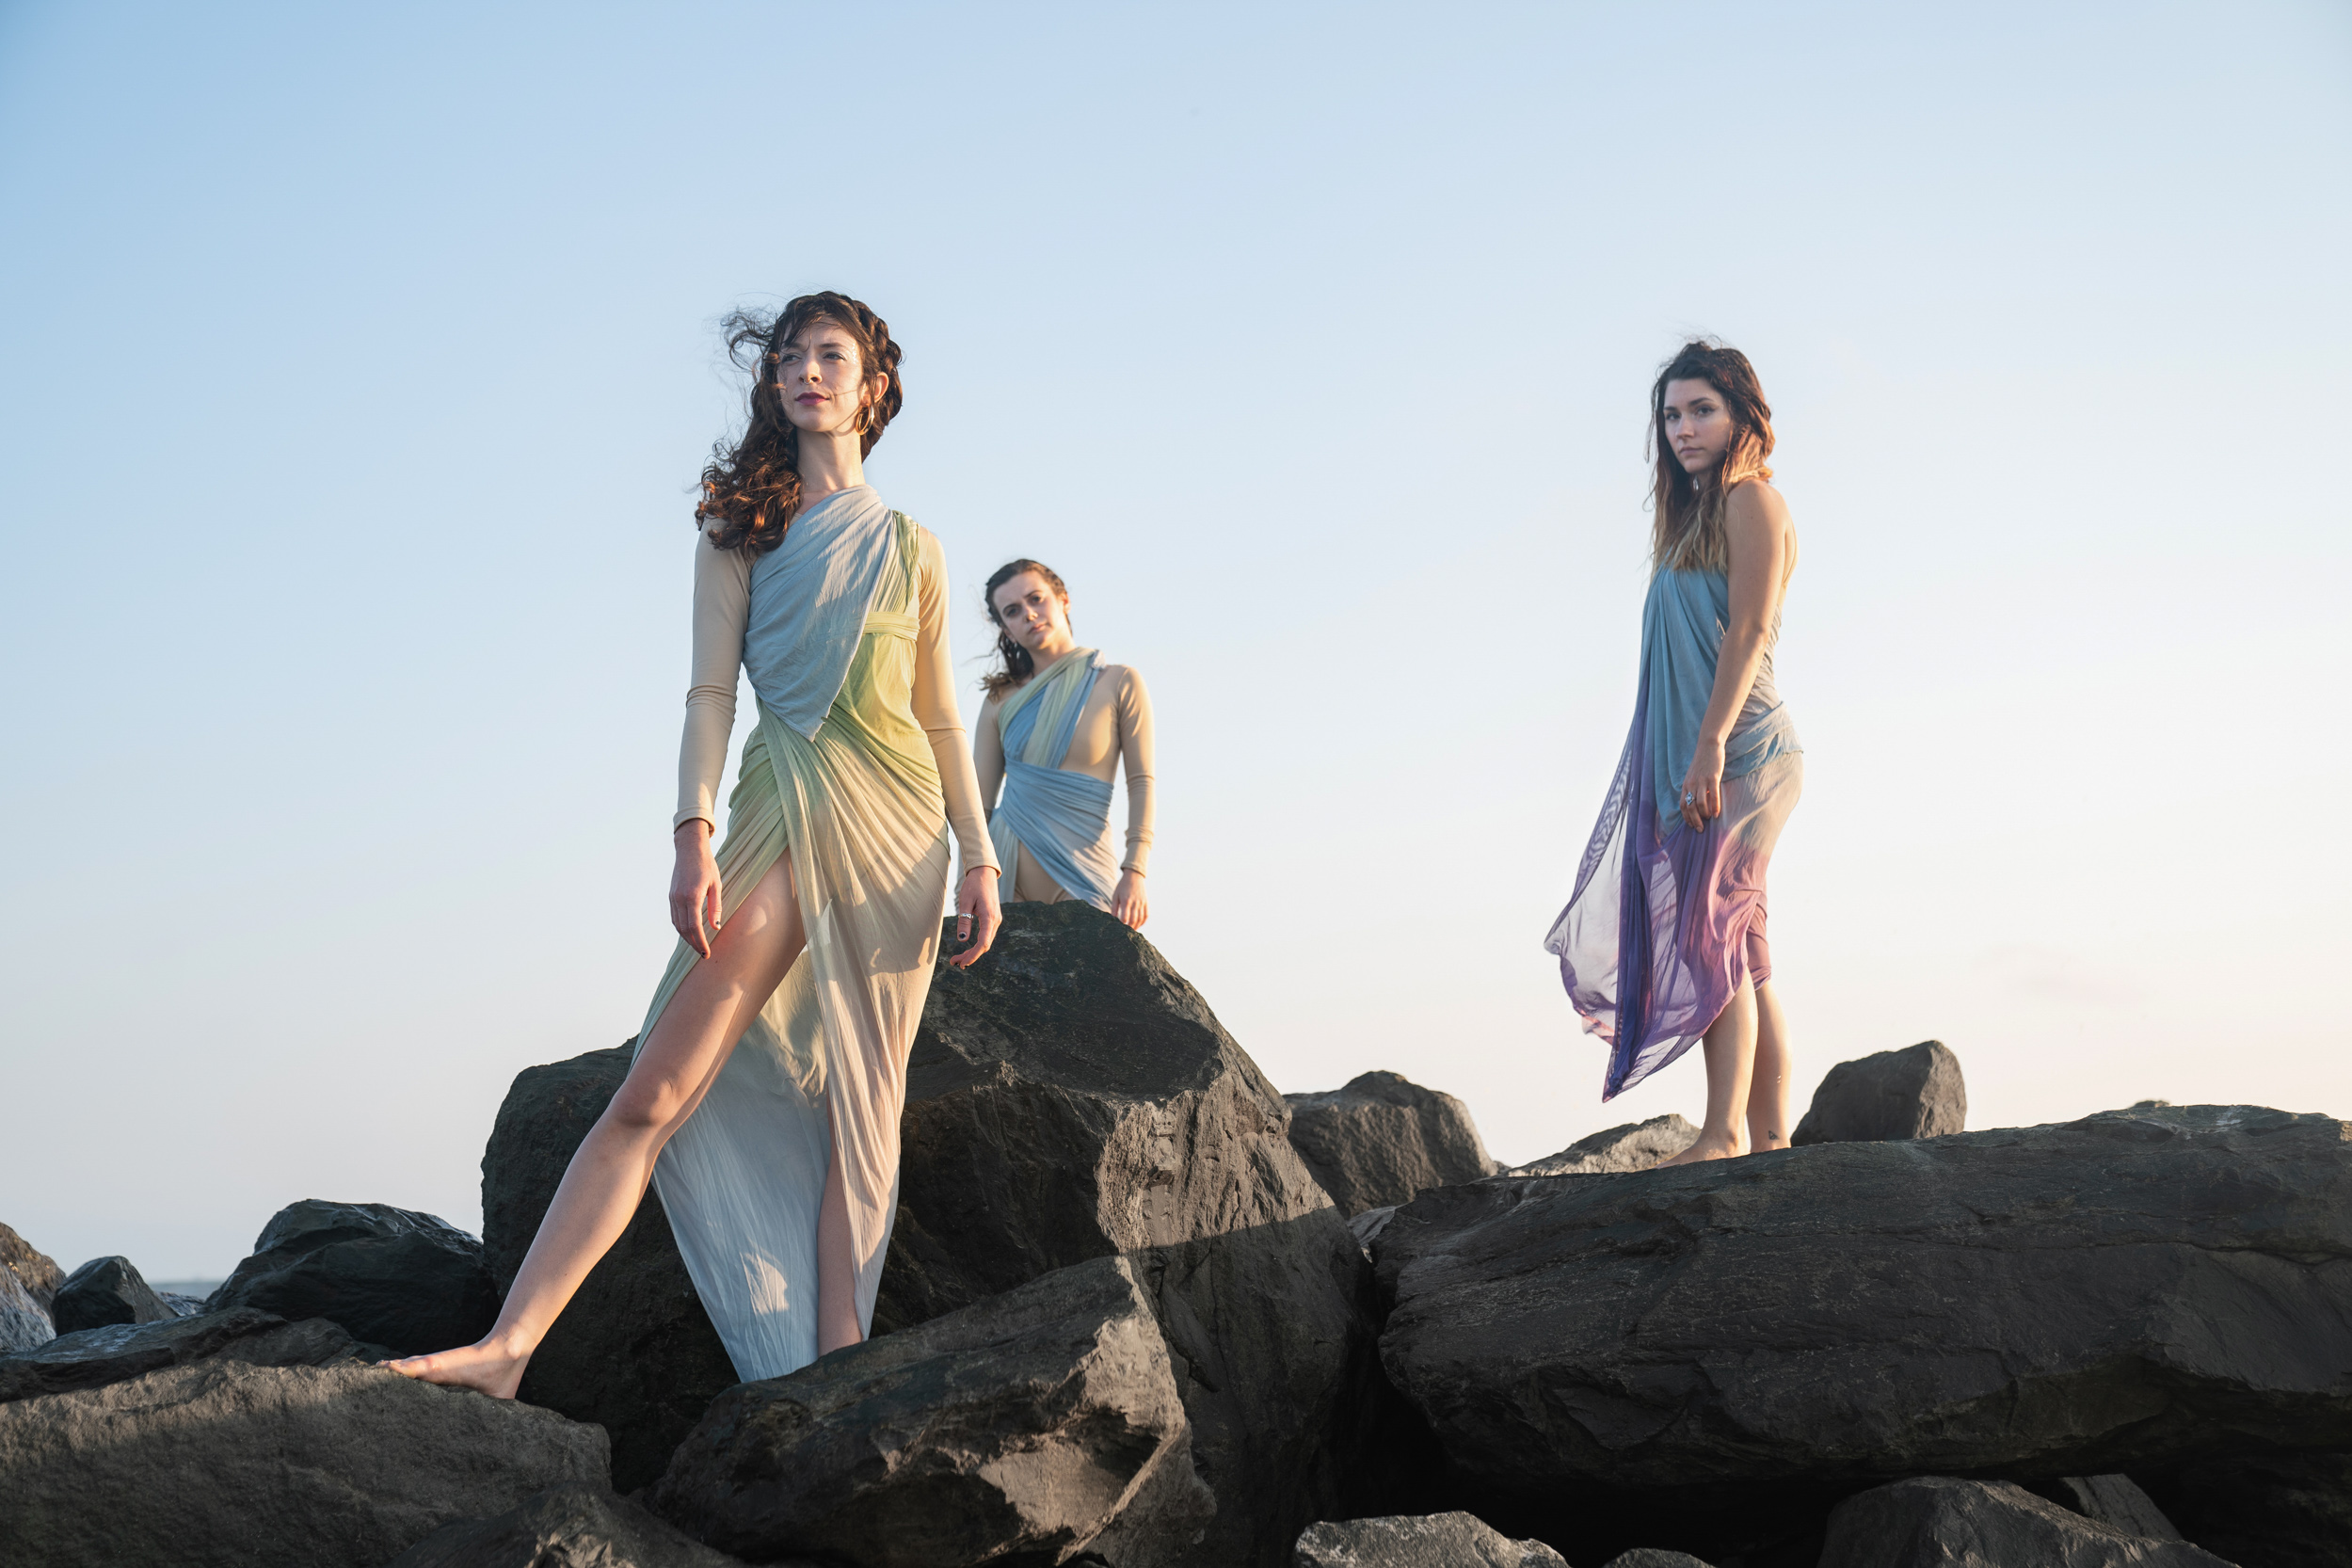 Female dancers modeling and posing in pretty dresses on a Louisiana Gulf Coast beach at sunset